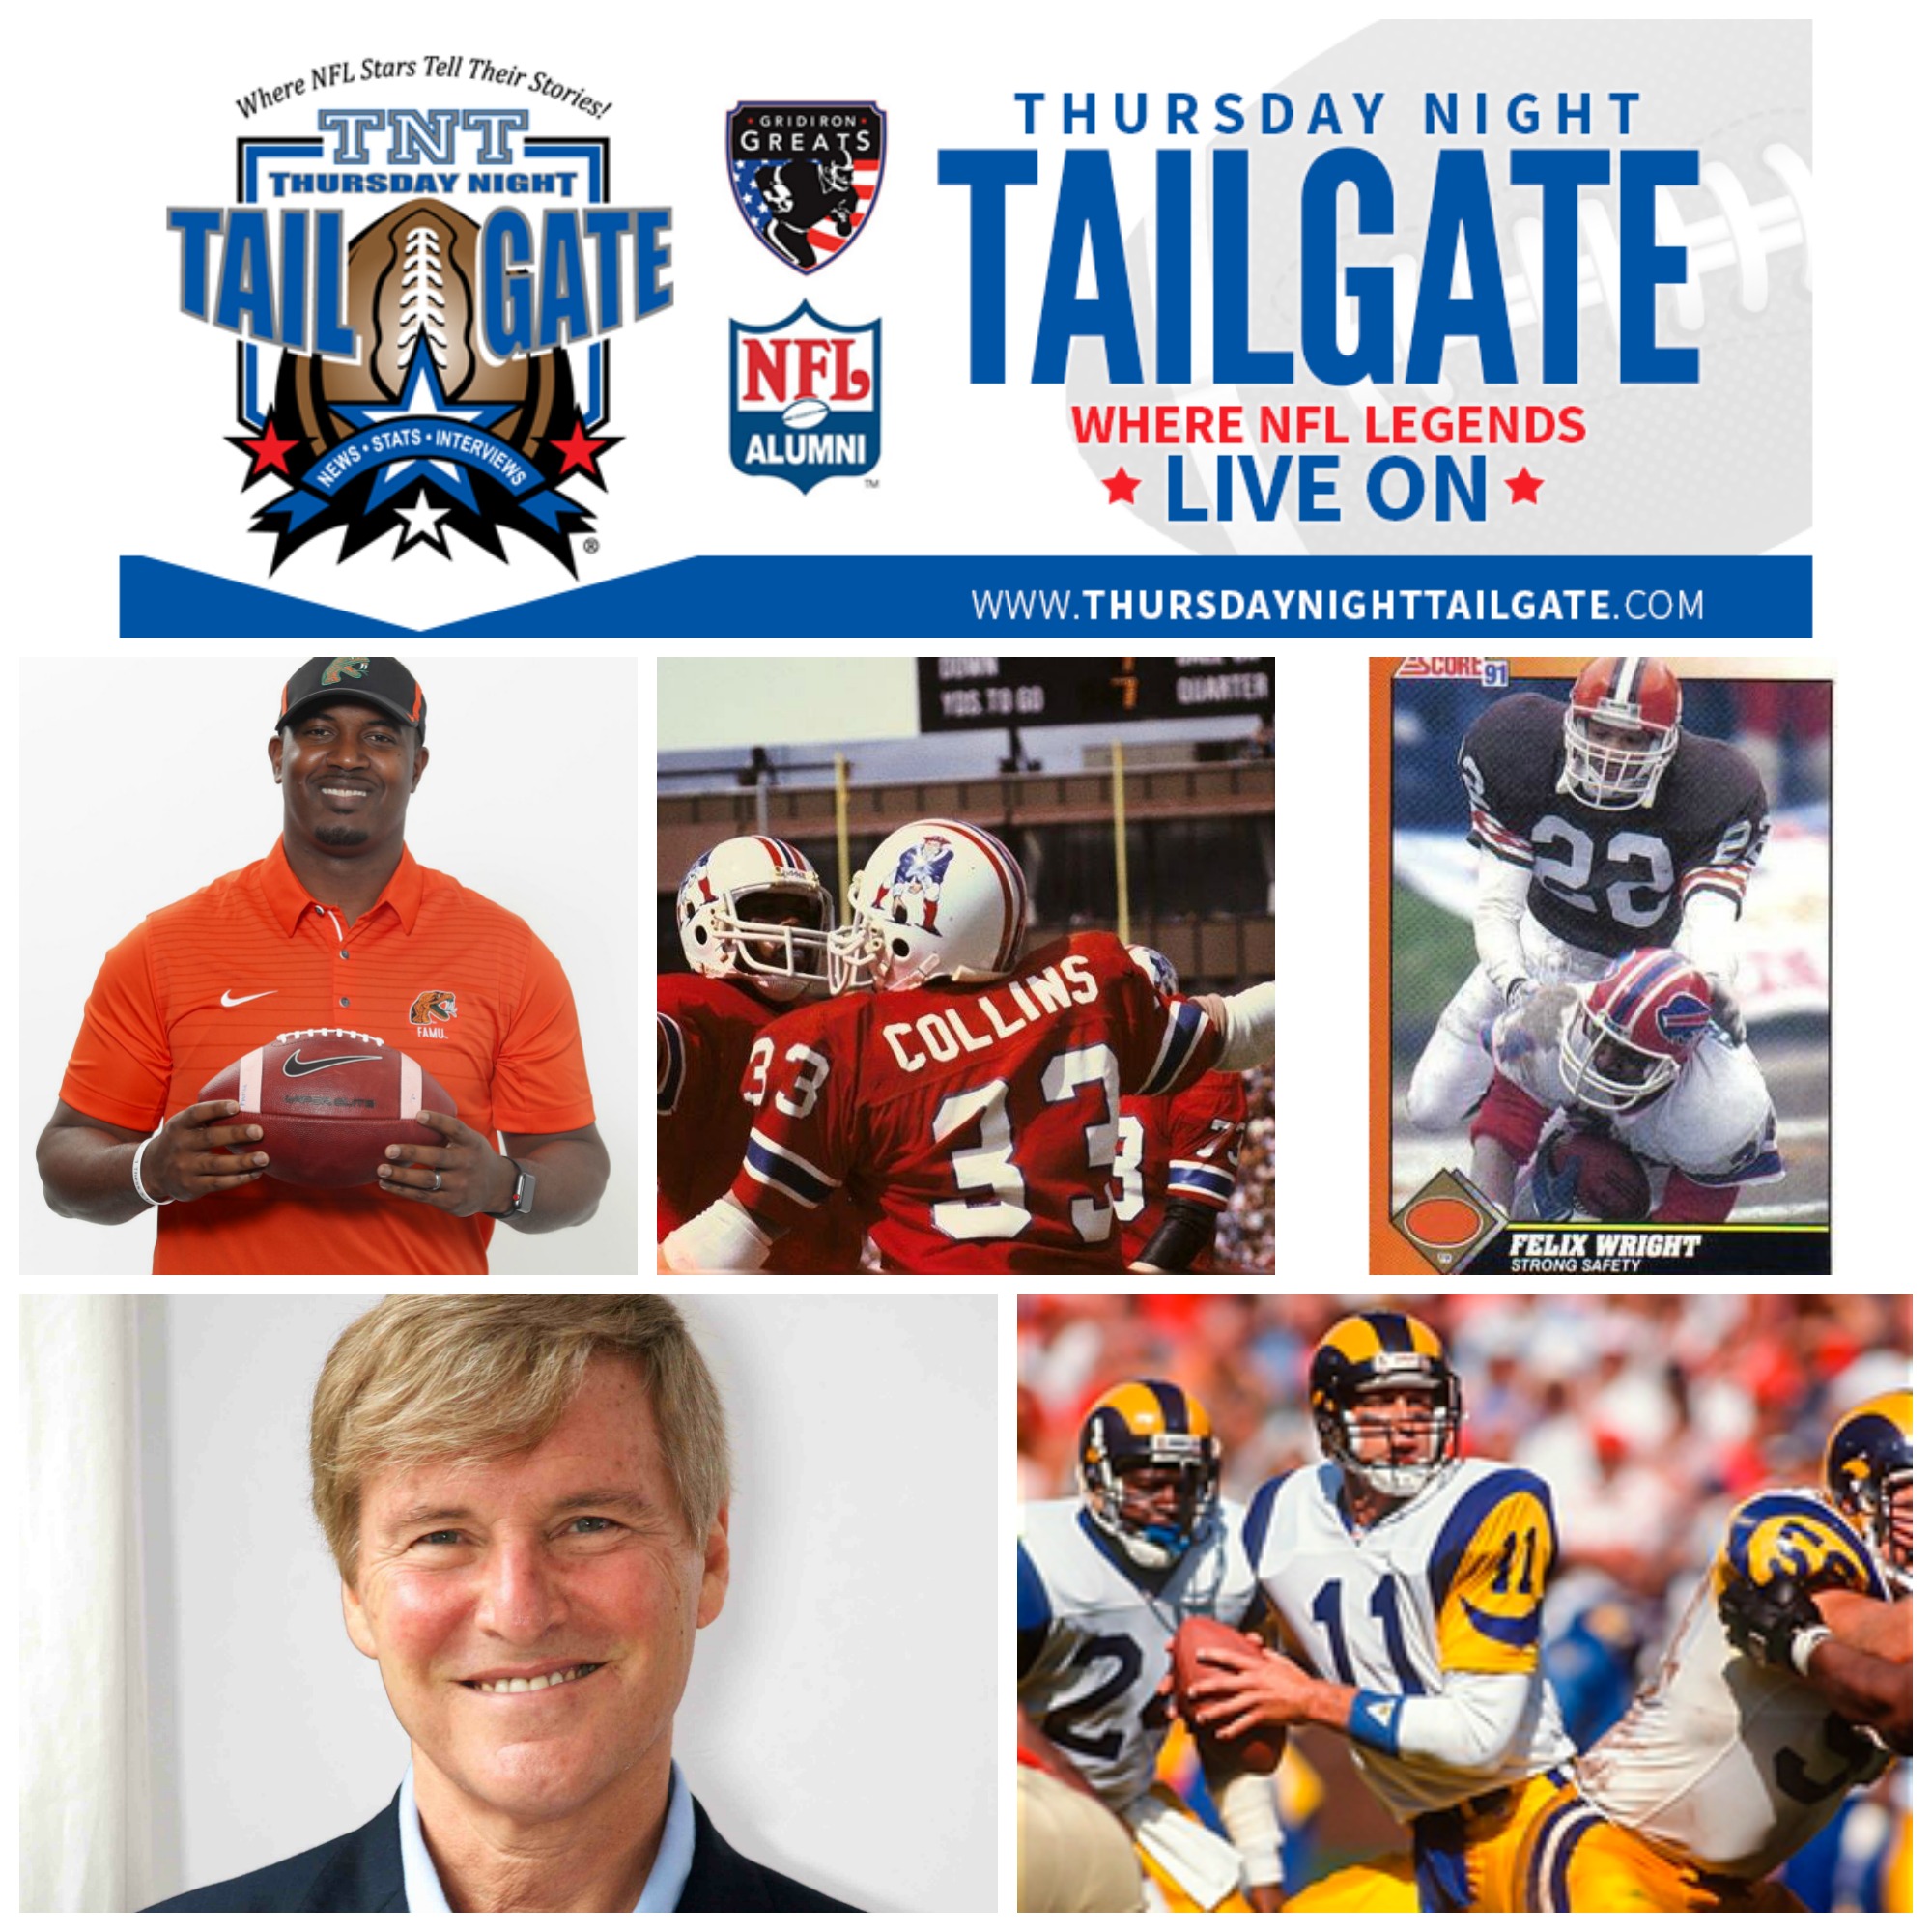 We Talk College Football, NFL Playoffs, and Players Doing Great Things in their Communities with Willie Simmons, Tony Collins, Felix Wright, Leigh Steinberg, & Jim Everett